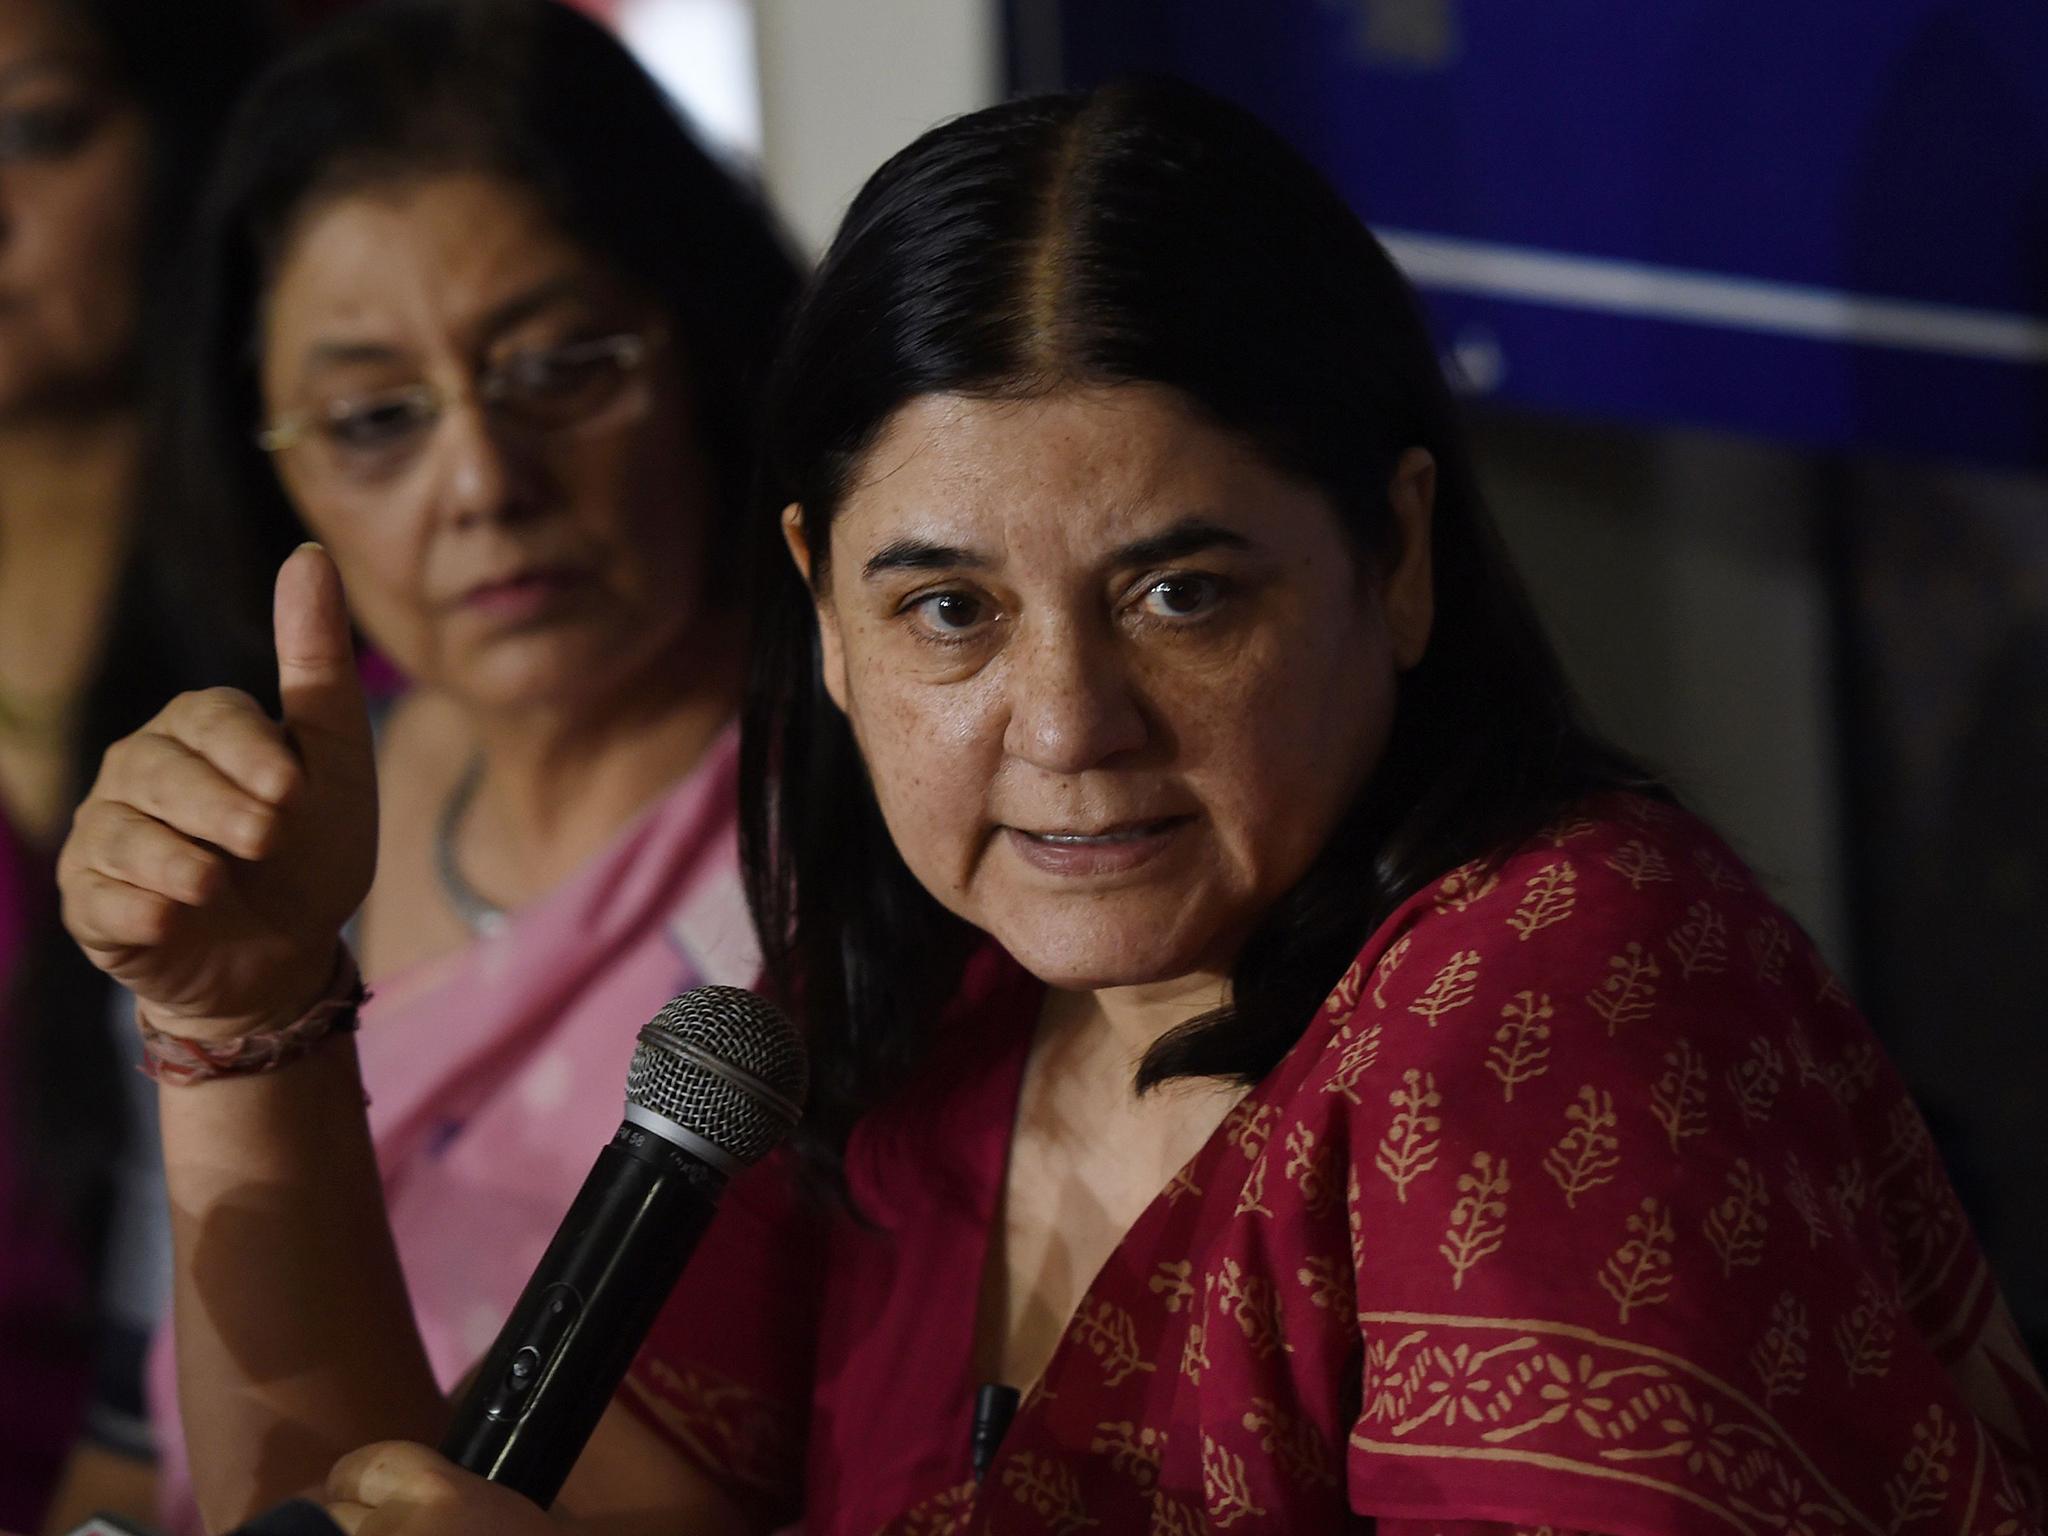 Maneka Gandhi made the false claim that India is in the bottom four countries in the world for rape cases